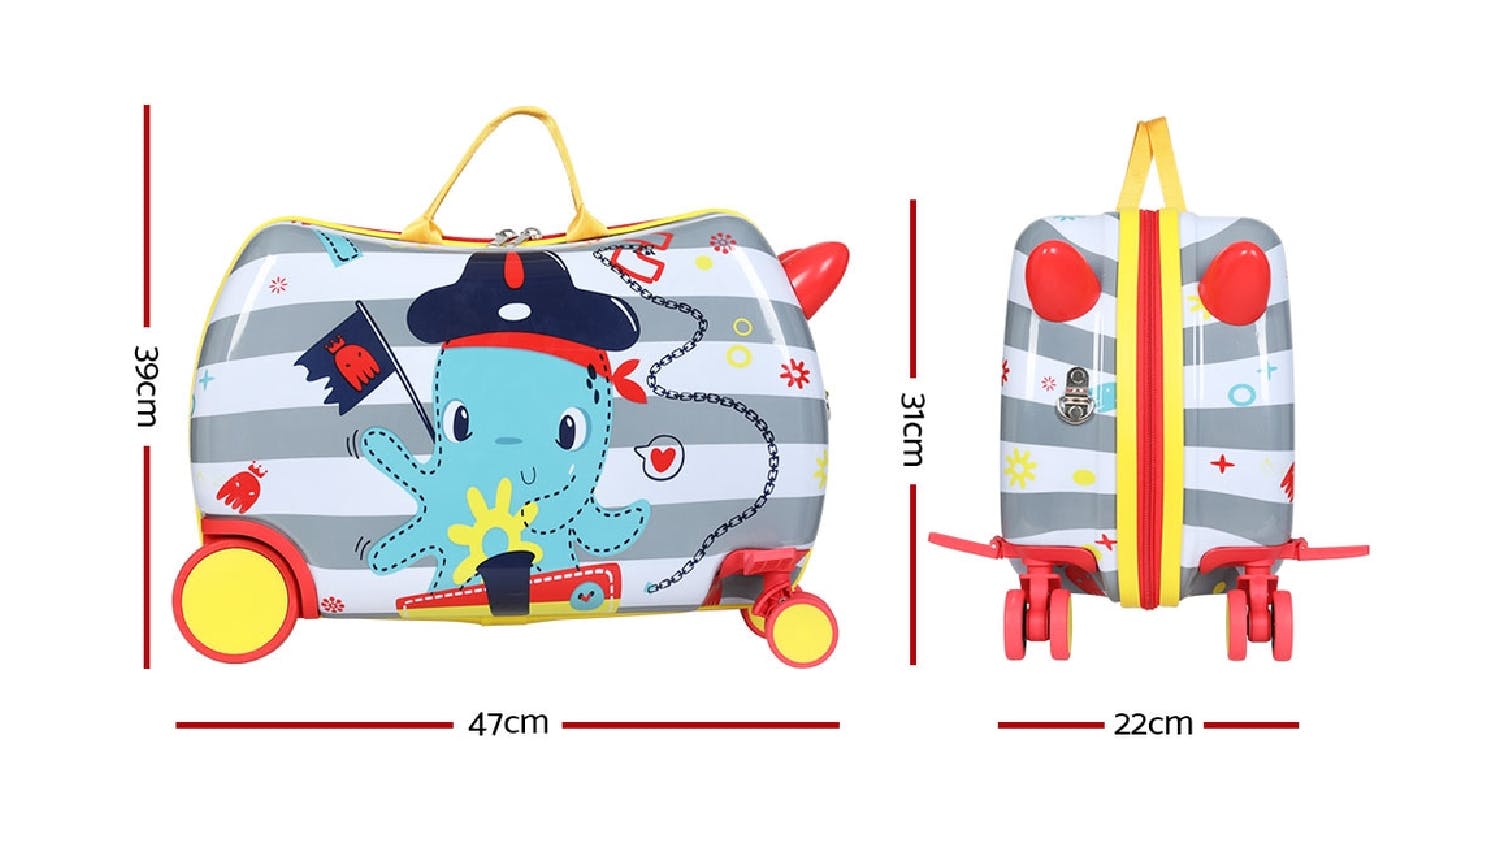 Wanderlite Kids' Ride-On Luggage with Wheels 43cm - Octo-Pirate